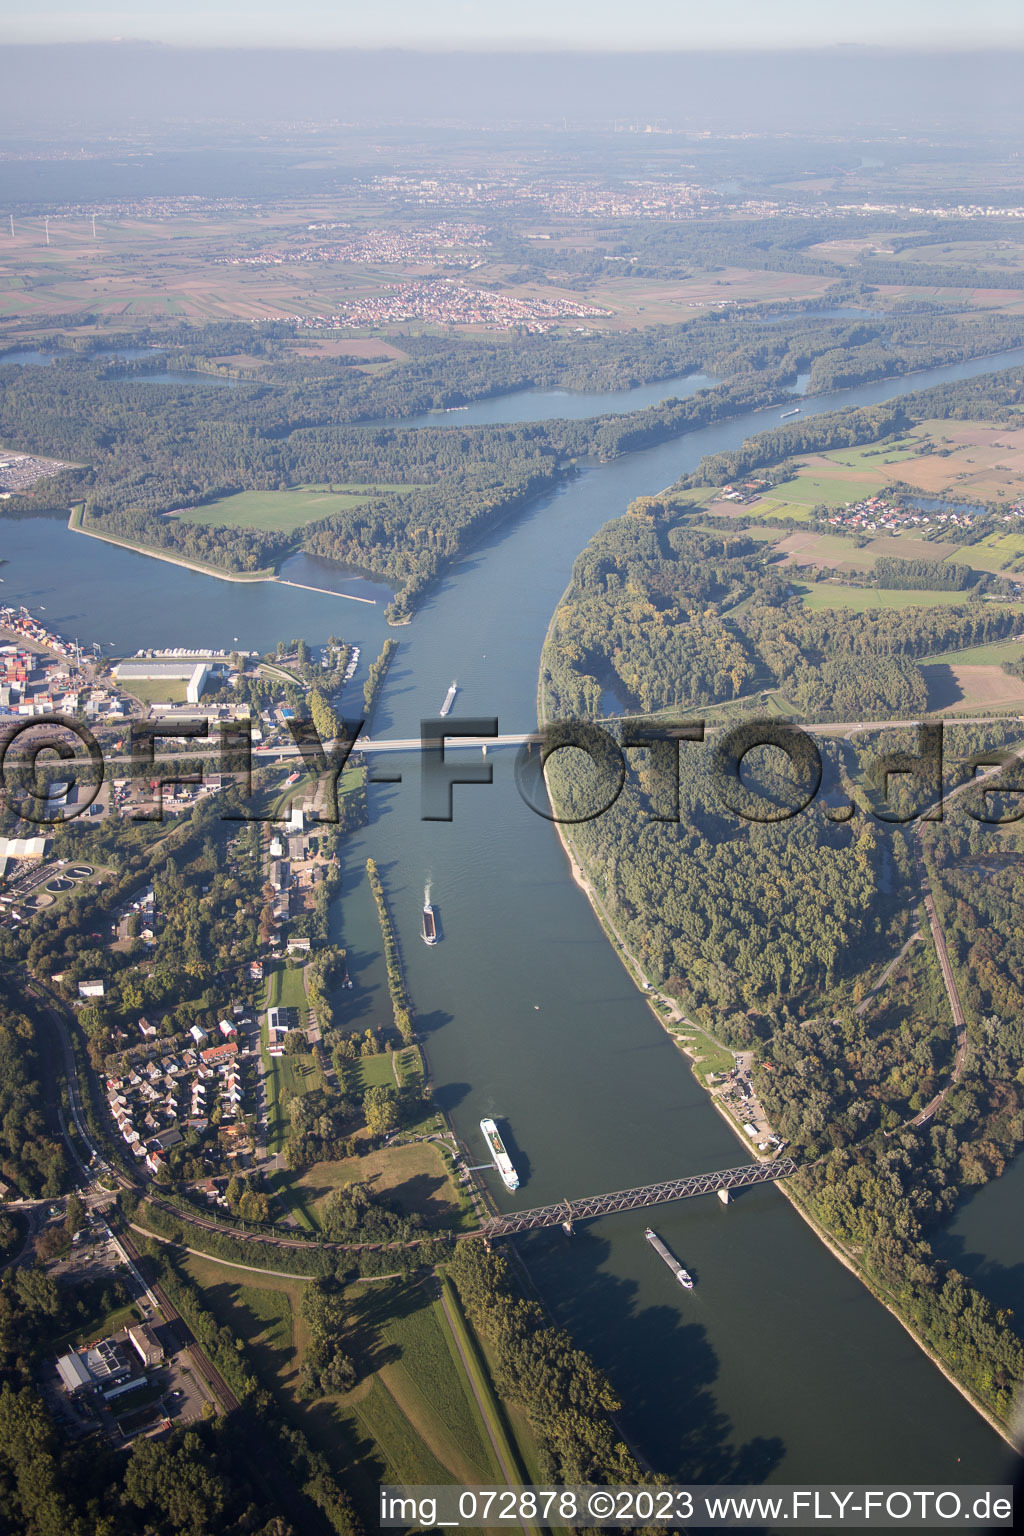 Drone image of Germersheim in the state Rhineland-Palatinate, Germany